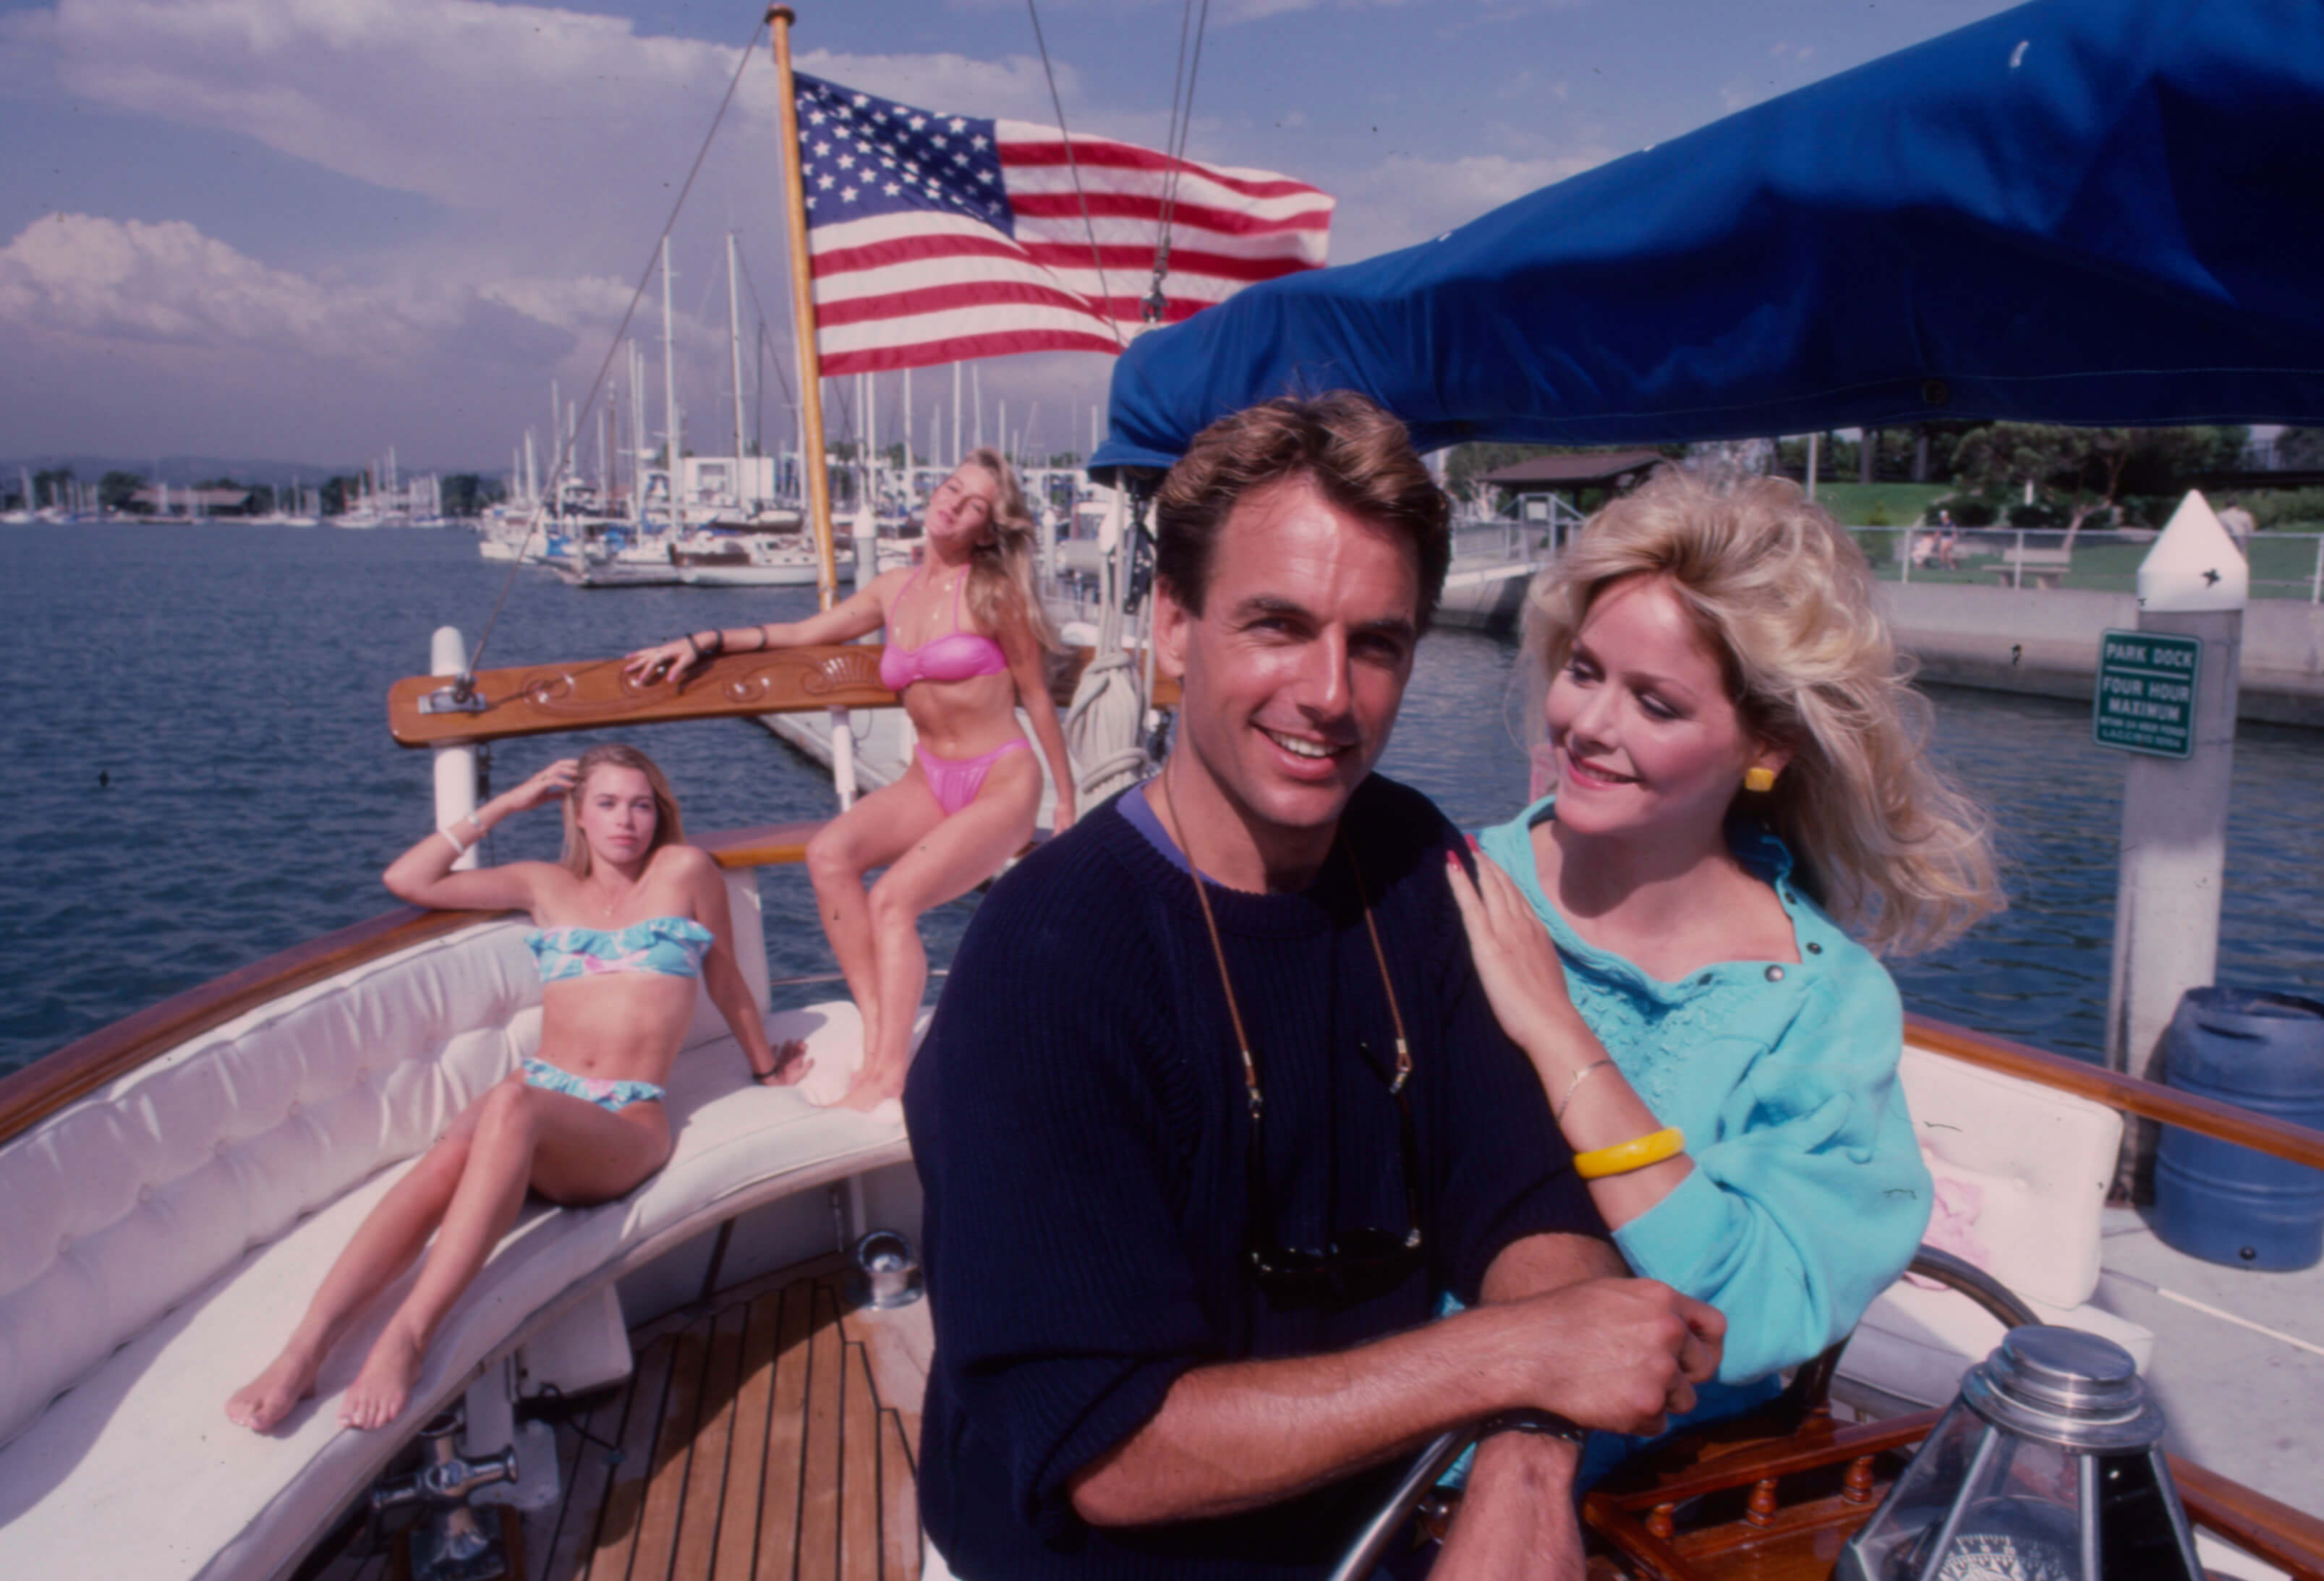 Mark Harmon appearing on a boat with three women in 'Prince of Bel Air'